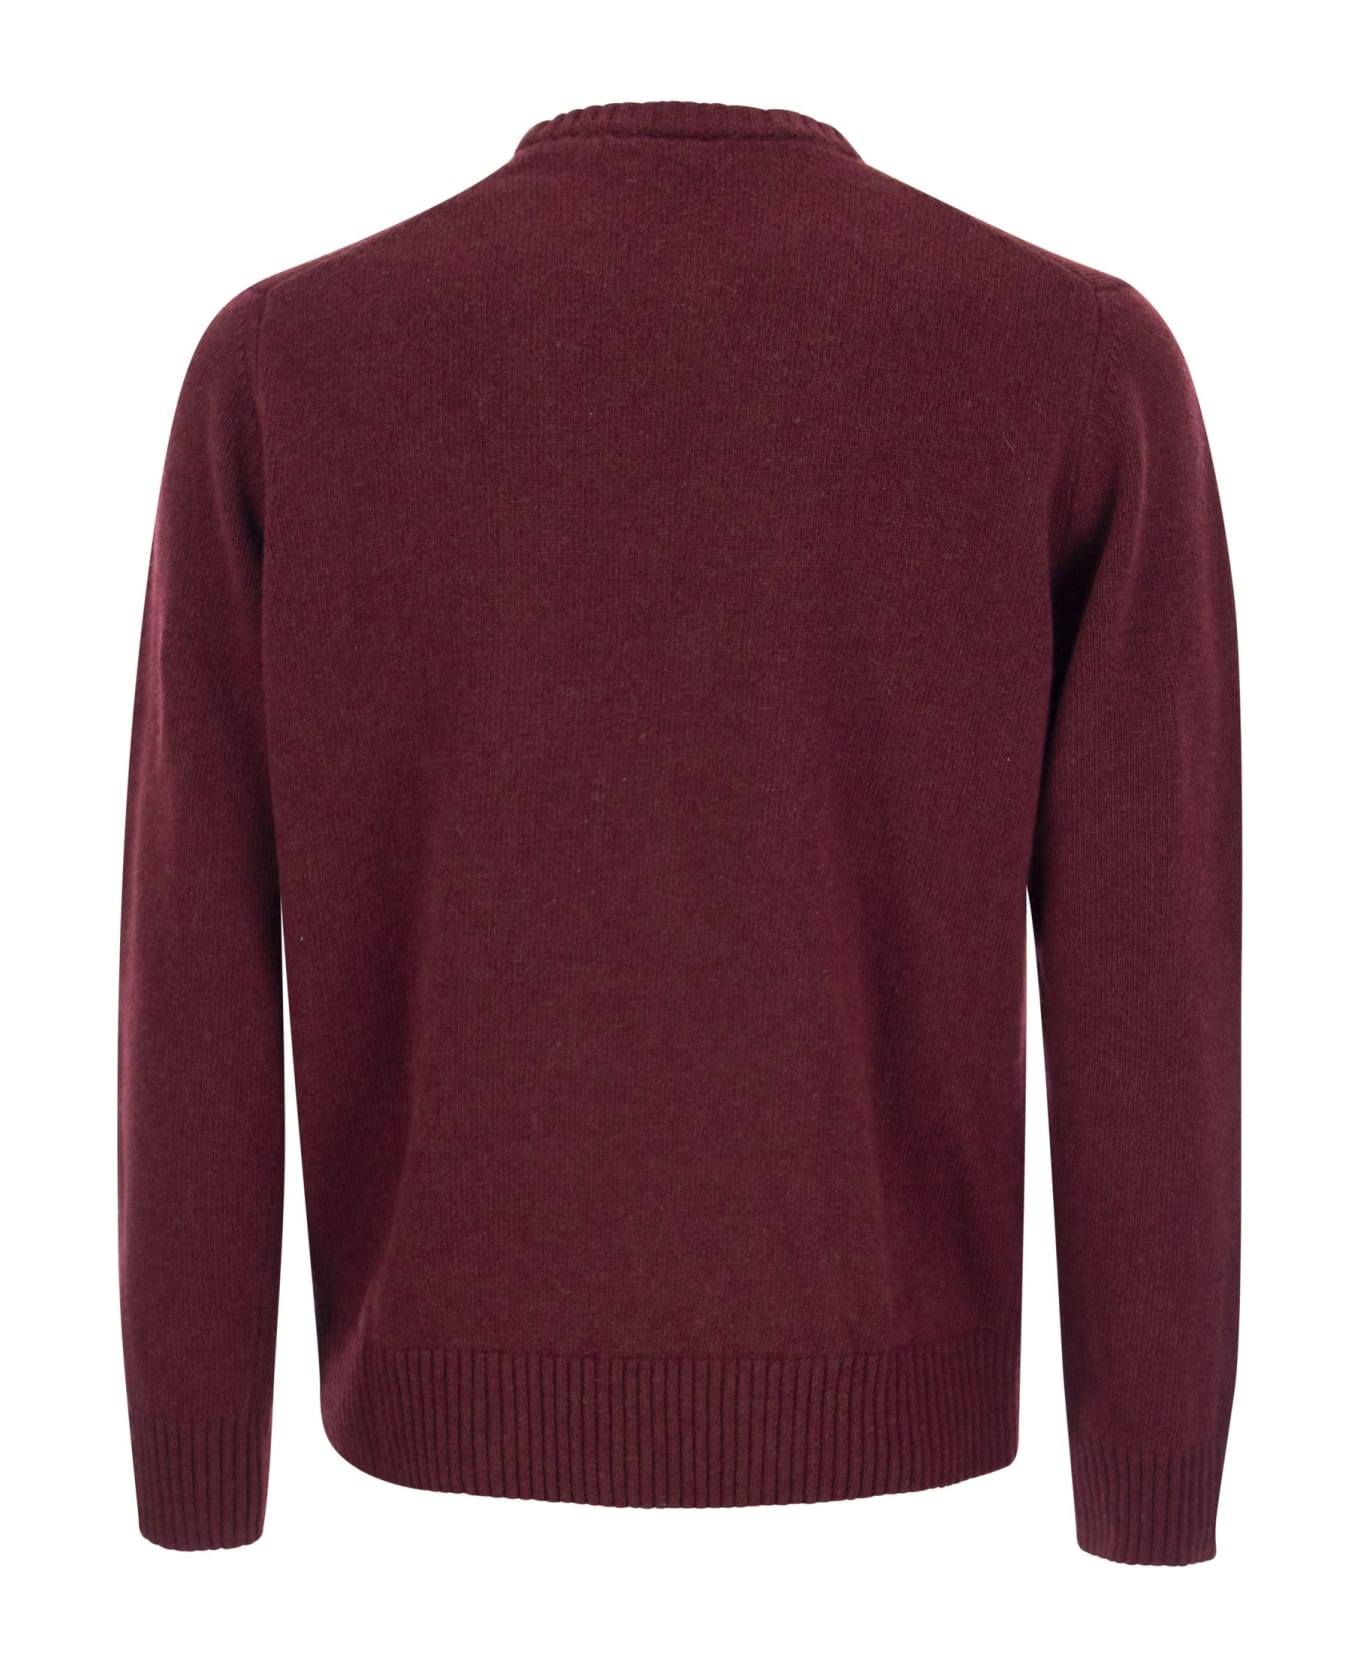 Paul&Shark Wool Crew Neck With Arm Patch Sweater - BORDEAUX ニットウェア